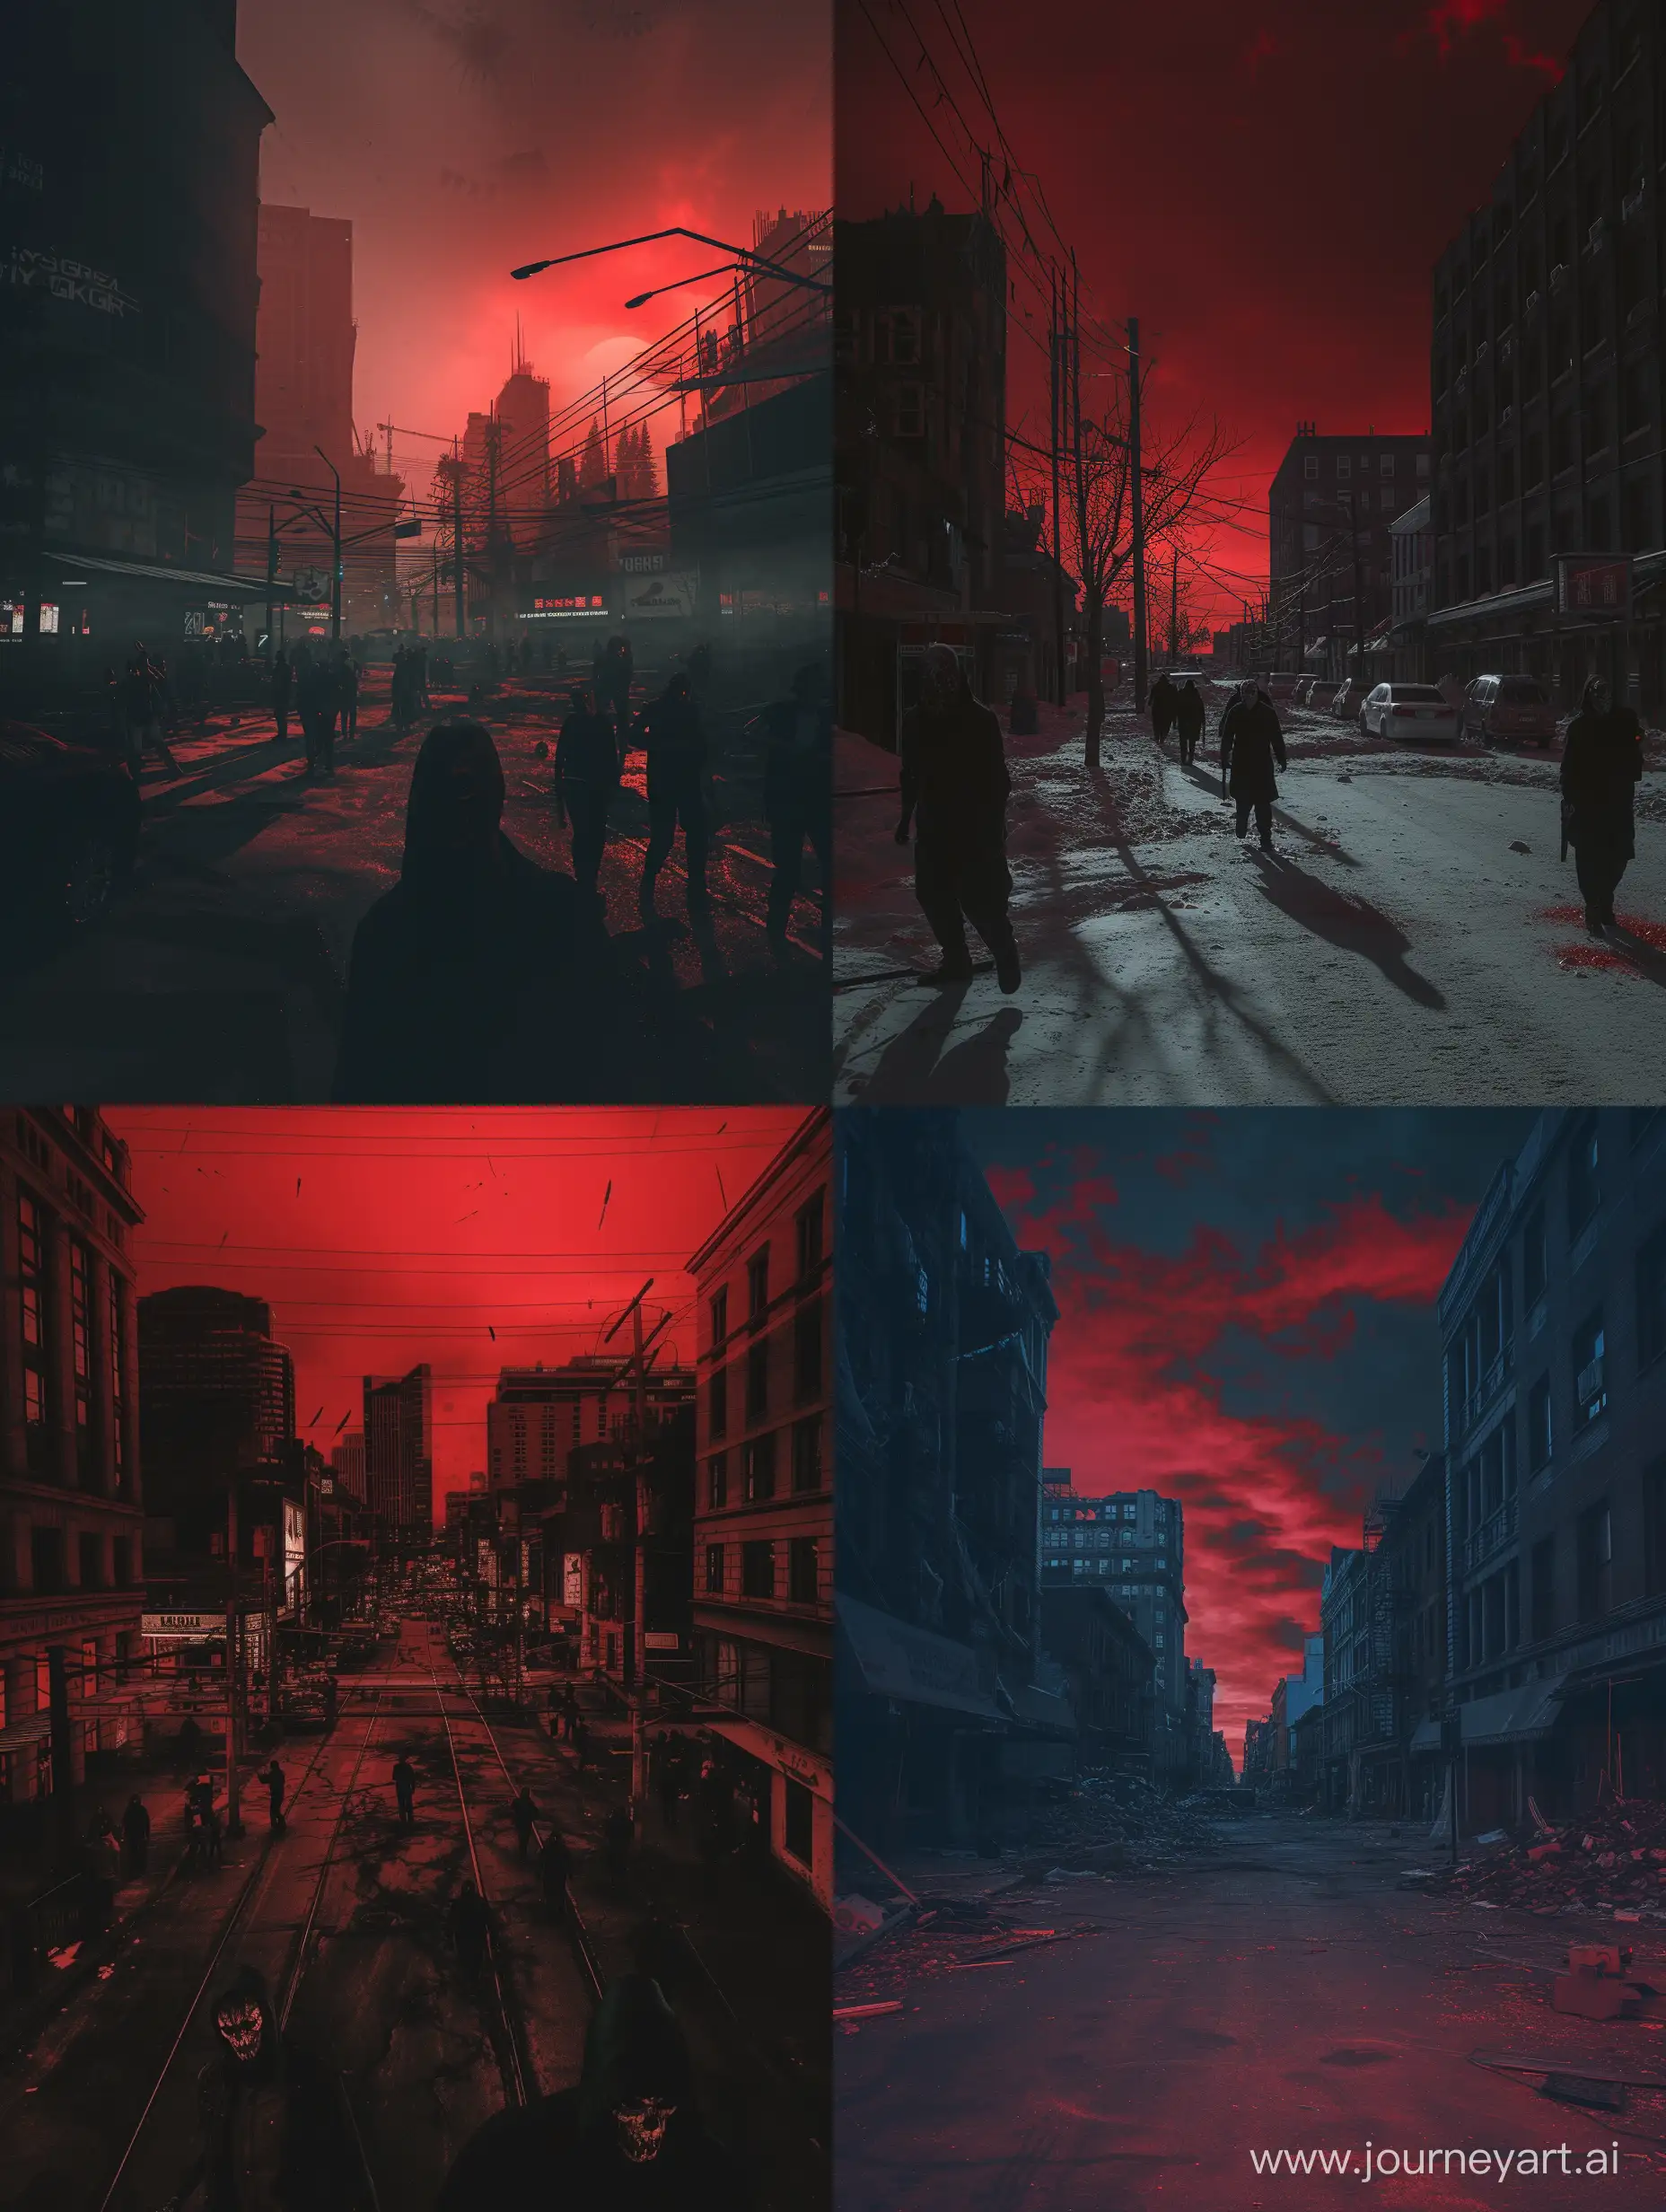 Dystopian-Nightmare-Twisted-Purge-Scenes-in-a-BloodSoaked-City